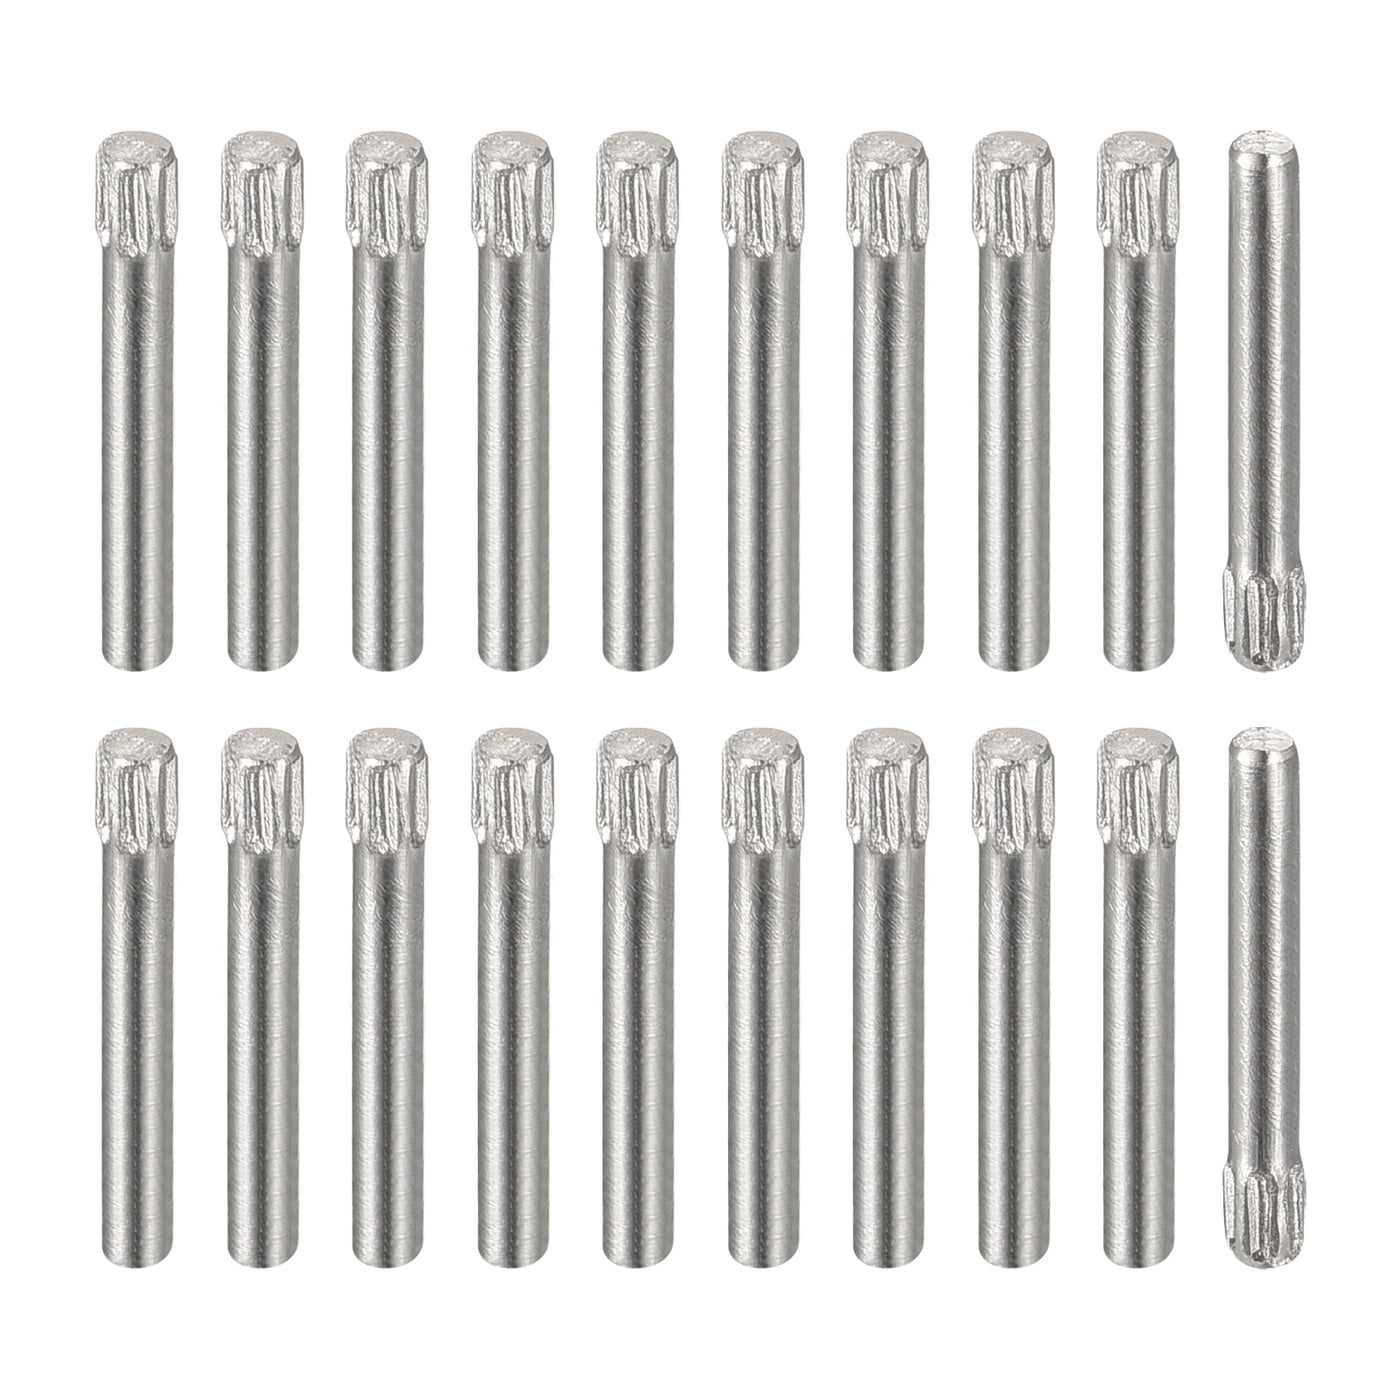 uxcell Uxcell 1.5x12mm 304 Stainless Steel Dowel Pins, 20Pcs Knurled Head Flat End Dowel Pin